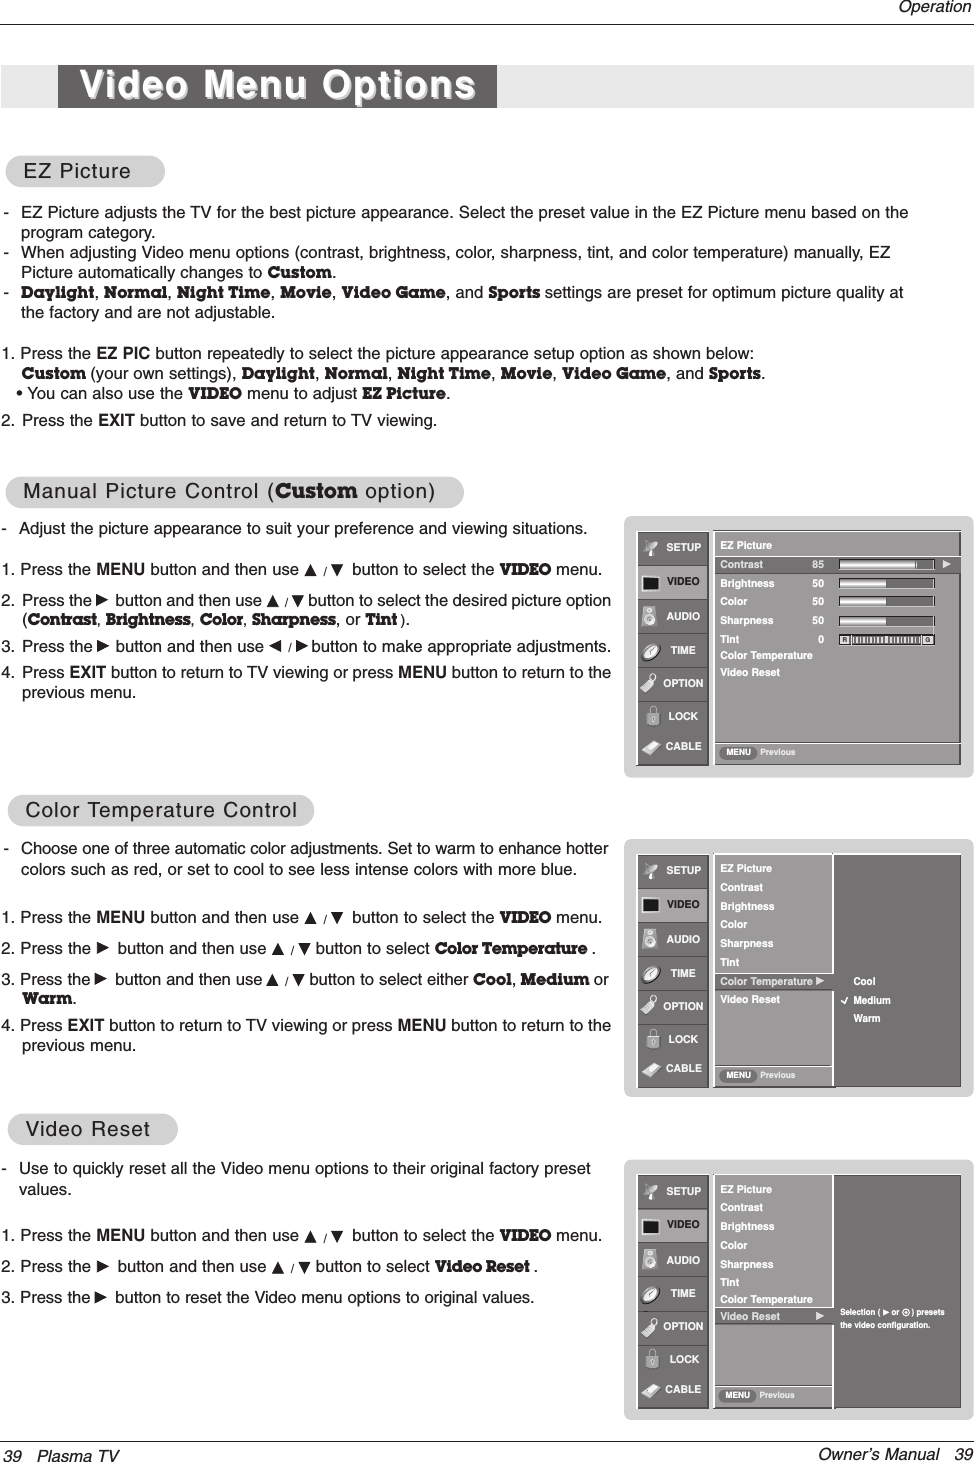 Owner’s Manual   39- Use to quickly reset all the Video menu options to their original factory presetvalues.1. Press the MENU button and then use D / Ebutton to select the VIDEO menu.2. Press the Gbutton and then use D / Ebutton to select Video Reset . 3. Press the Gbutton to reset the Video menu options to original values.VVideo Resetideo ResetSETUPVIDEOAUDIOTIMEOPTIONEZ PictureContrastBrightnessColorSharpnessTintColor TemperatureVideo Reset GSelection ( Gor     ) presetsthe video configuration.LOCKPreviousMENUCABLE39 Plasma TVOperation- Adjust the picture appearance to suit your preference and viewing situations.1. Press the MENU button and then use D / Ebutton to select the VIDEO menu.2. Press the Gbutton and then use D / Ebutton to select the desired picture option(Contrast,Brightness,Color,Sharpness, or Tint ).3. Press the Gbutton and then use F / Gbutton to make appropriate adjustments.4. Press EXIT button to return to TV viewing or press MENU button to return to theprevious menu.1. Press the EZ PIC button repeatedly to select the picture appearance setup option as shown below:Custom (your own settings), Daylight, Normal, Night Time, Movie, Video Game, and Sports.• You can also use the VIDEO menu to adjust EZ Picture.2. Press the EXIT button to save and return to TV viewing.EZ PictureEZ PictureManual Picture Control (Manual Picture Control (Custom option)option)- Choose one of three automatic color adjustments. Set to warm to enhance hottercolors such as red, or set to cool to see less intense colors with more blue.1. Press the MENU button and then use D / Ebutton to select the VIDEO menu.2. Press the Gbutton and then use D / Ebutton to select Color Temperature . 3. Press the Gbutton and then use D / Ebutton to select either Cool,Medium orWarm.4. Press EXIT button to return to TV viewing or press MENU button to return to theprevious menu.Color Color TTemperature Controlemperature Control- EZ Picture adjusts the TV for the best picture appearance. Select the preset value in the EZ Picture menu based on theprogram category.- When adjusting Video menu options (contrast, brightness, color, sharpness, tint, and color temperature) manually, EZPicture automatically changes to Custom.-Daylight, Normal, Night Time, Movie, Video Game, and Sports settings are preset for optimum picture quality atthe factory and are not adjustable.SETUPVIDEOAUDIOTIMEOPTIONLOCKPreviousEZ PictureContrastBrightnessColorSharpnessTintColor Temperature GVideo ResetCoolMediumWarmMENUSETUPVIDEOAUDIOTIMEOPTIONLOCKPreviousEZ PictureContrast 85 GBrightness 50Color 50Sharpness 50Tint 0Color TemperatureVideo ResetMENUR GCABLECABLEVVideo Menu Optionsideo Menu Options